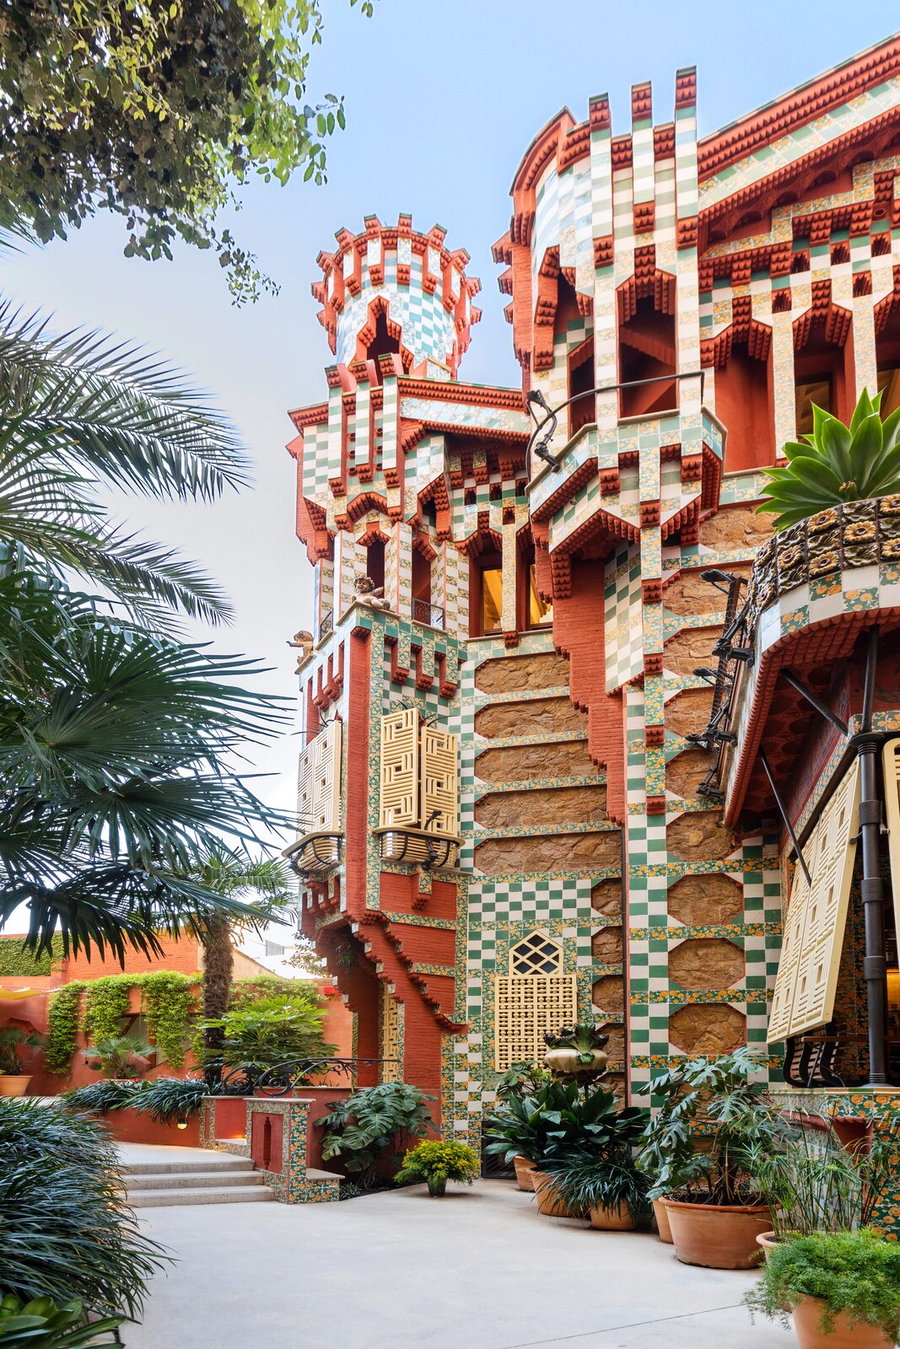 Aspects of Casa Vicens' exteriors illustrate the Moorish influence in Gaudí's work.